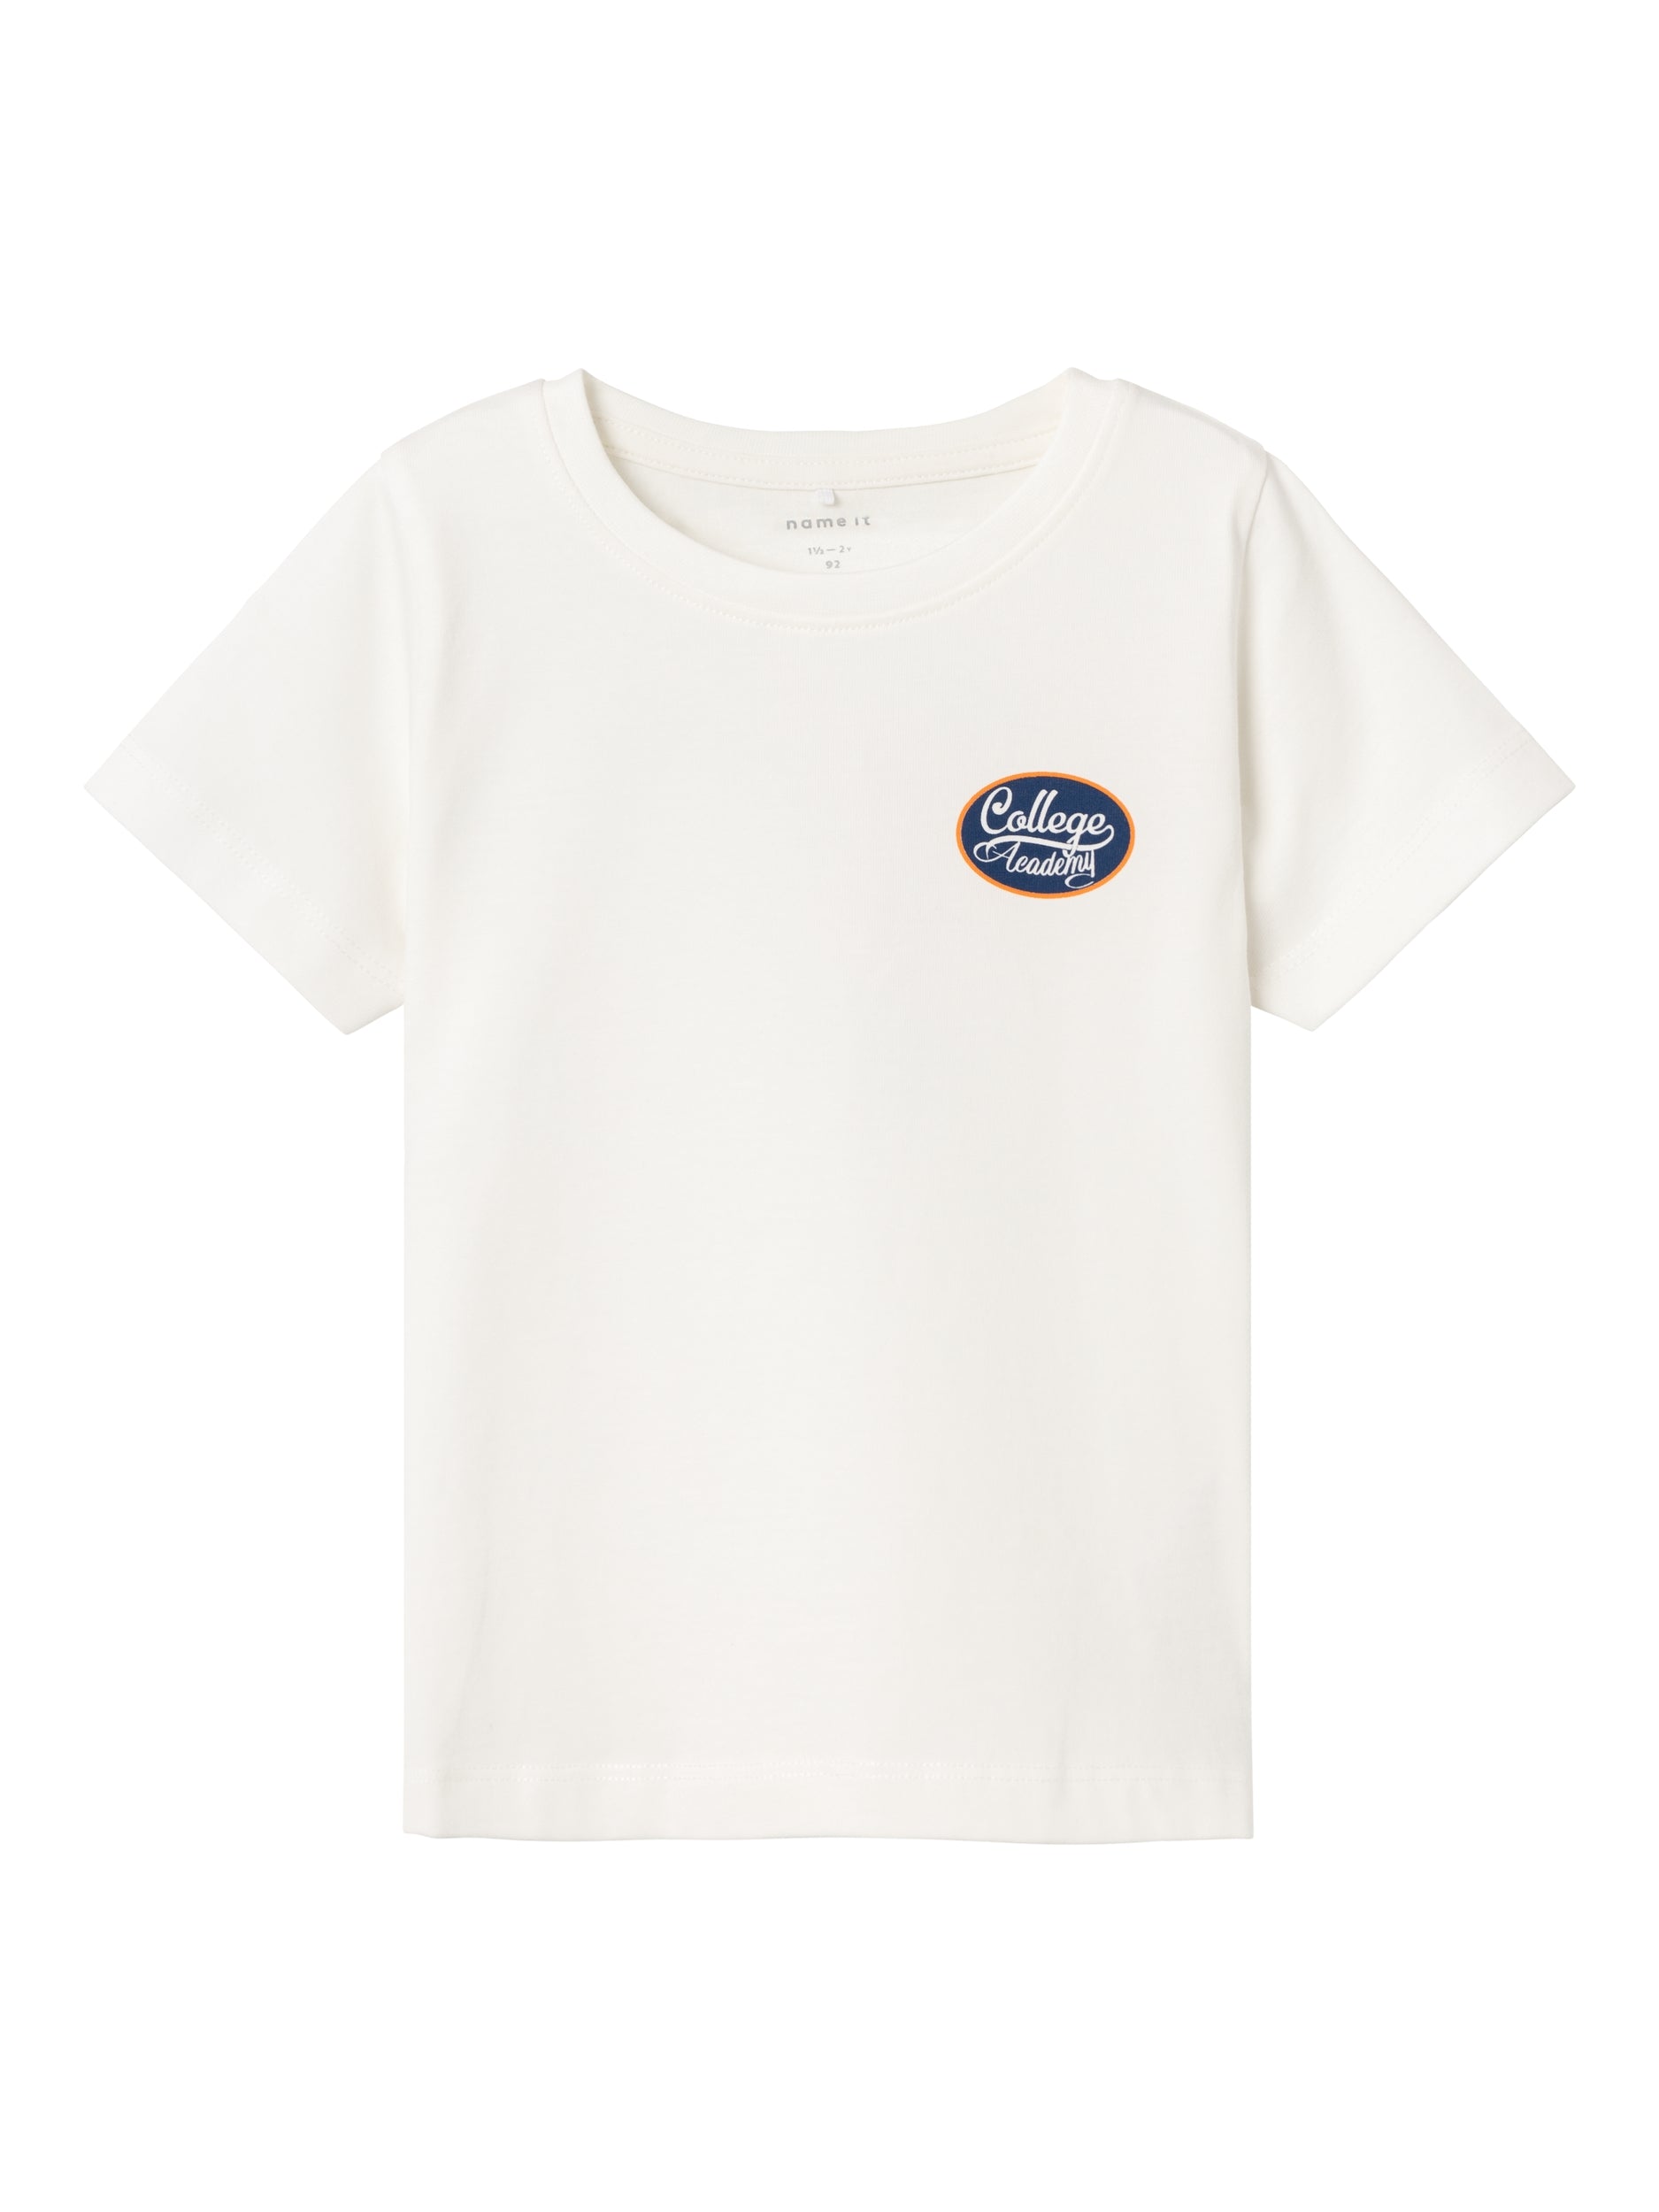 Name It t-shirt kids bianco con stampa in gomma